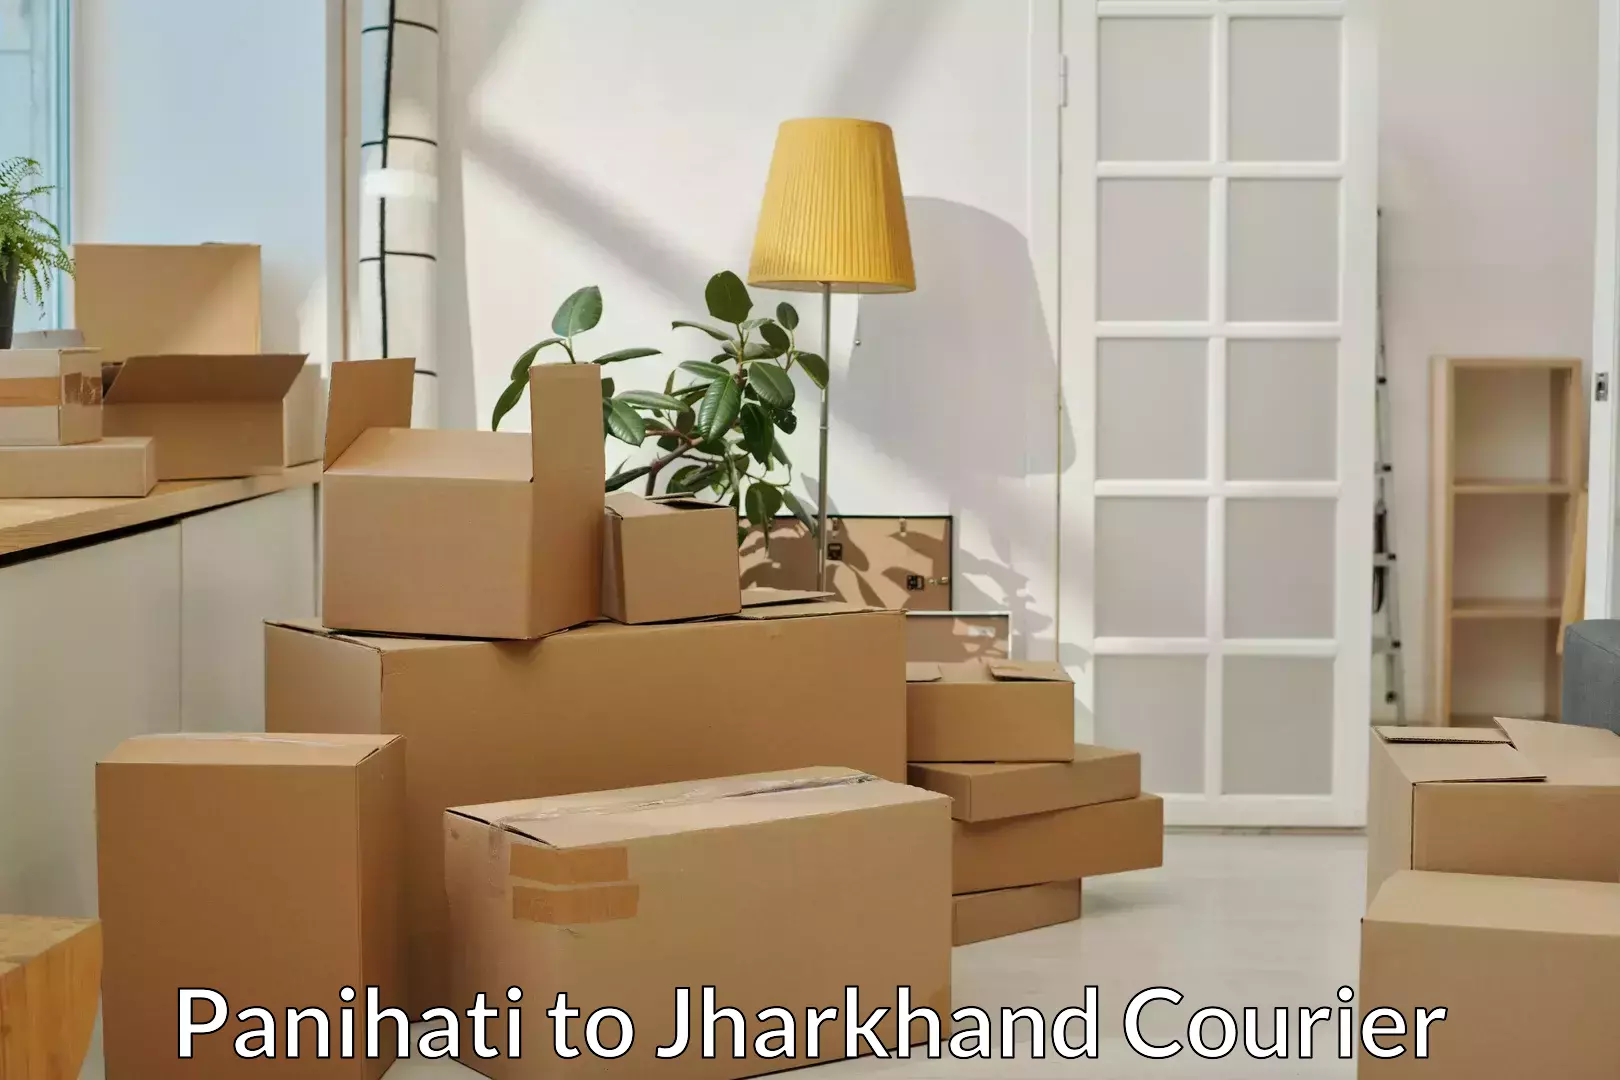 Long-distance moving services in Panihati to Dhanbad